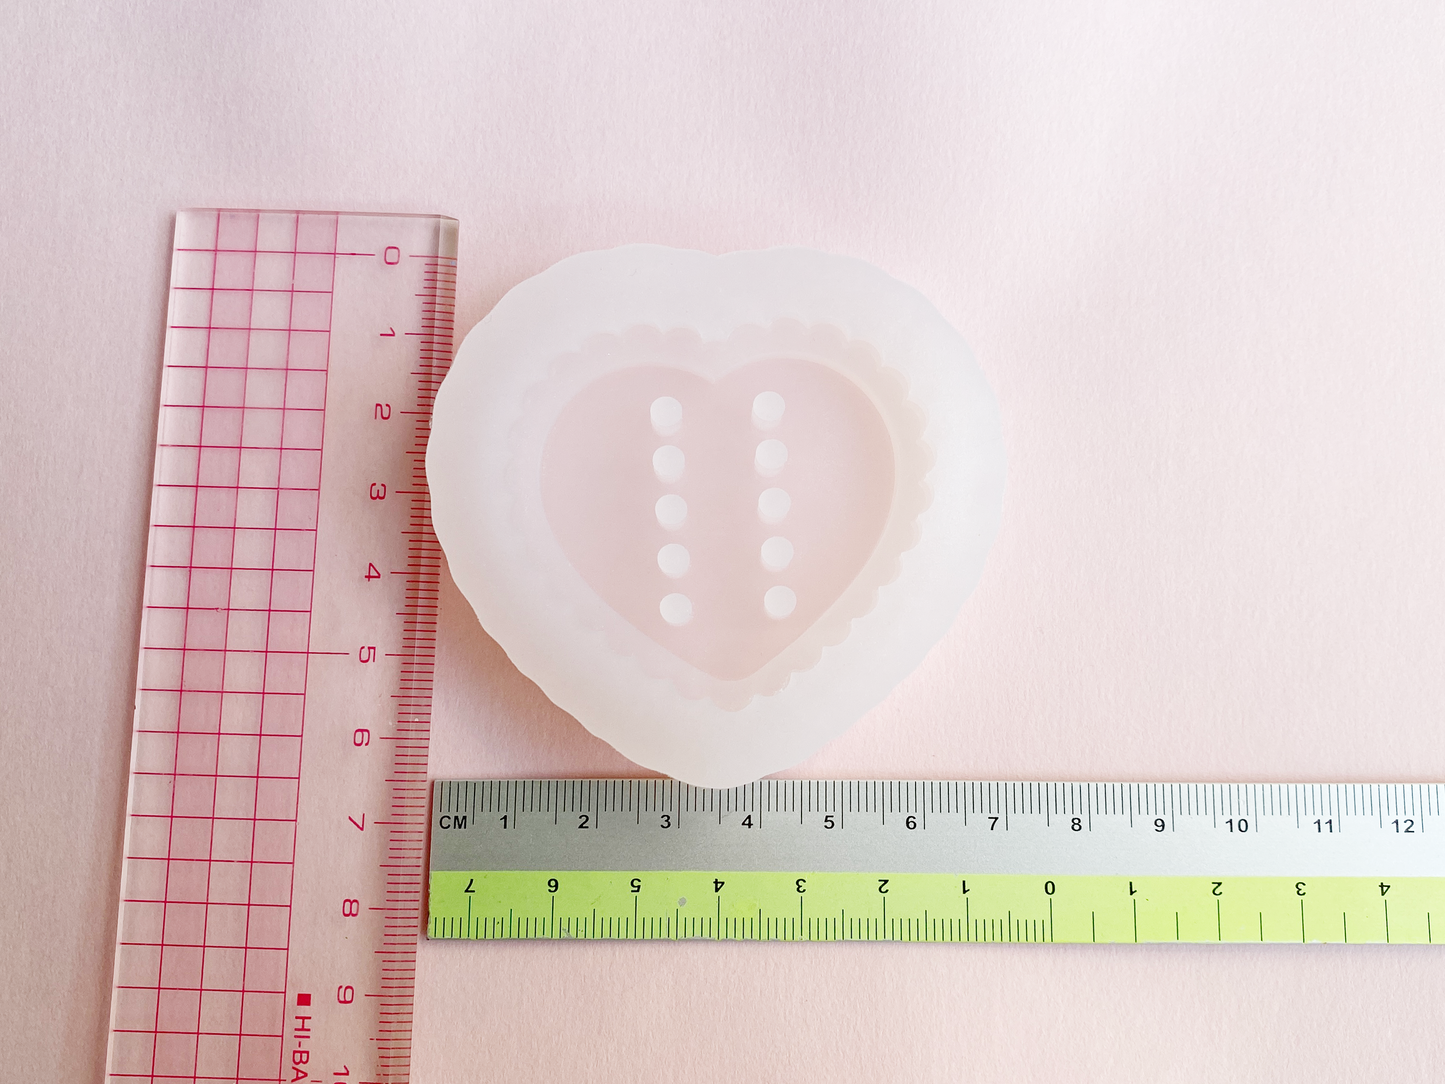 Scalloped Heart with Lace Corset Mold, Silicone Mold, Shiny UV Resin Mold